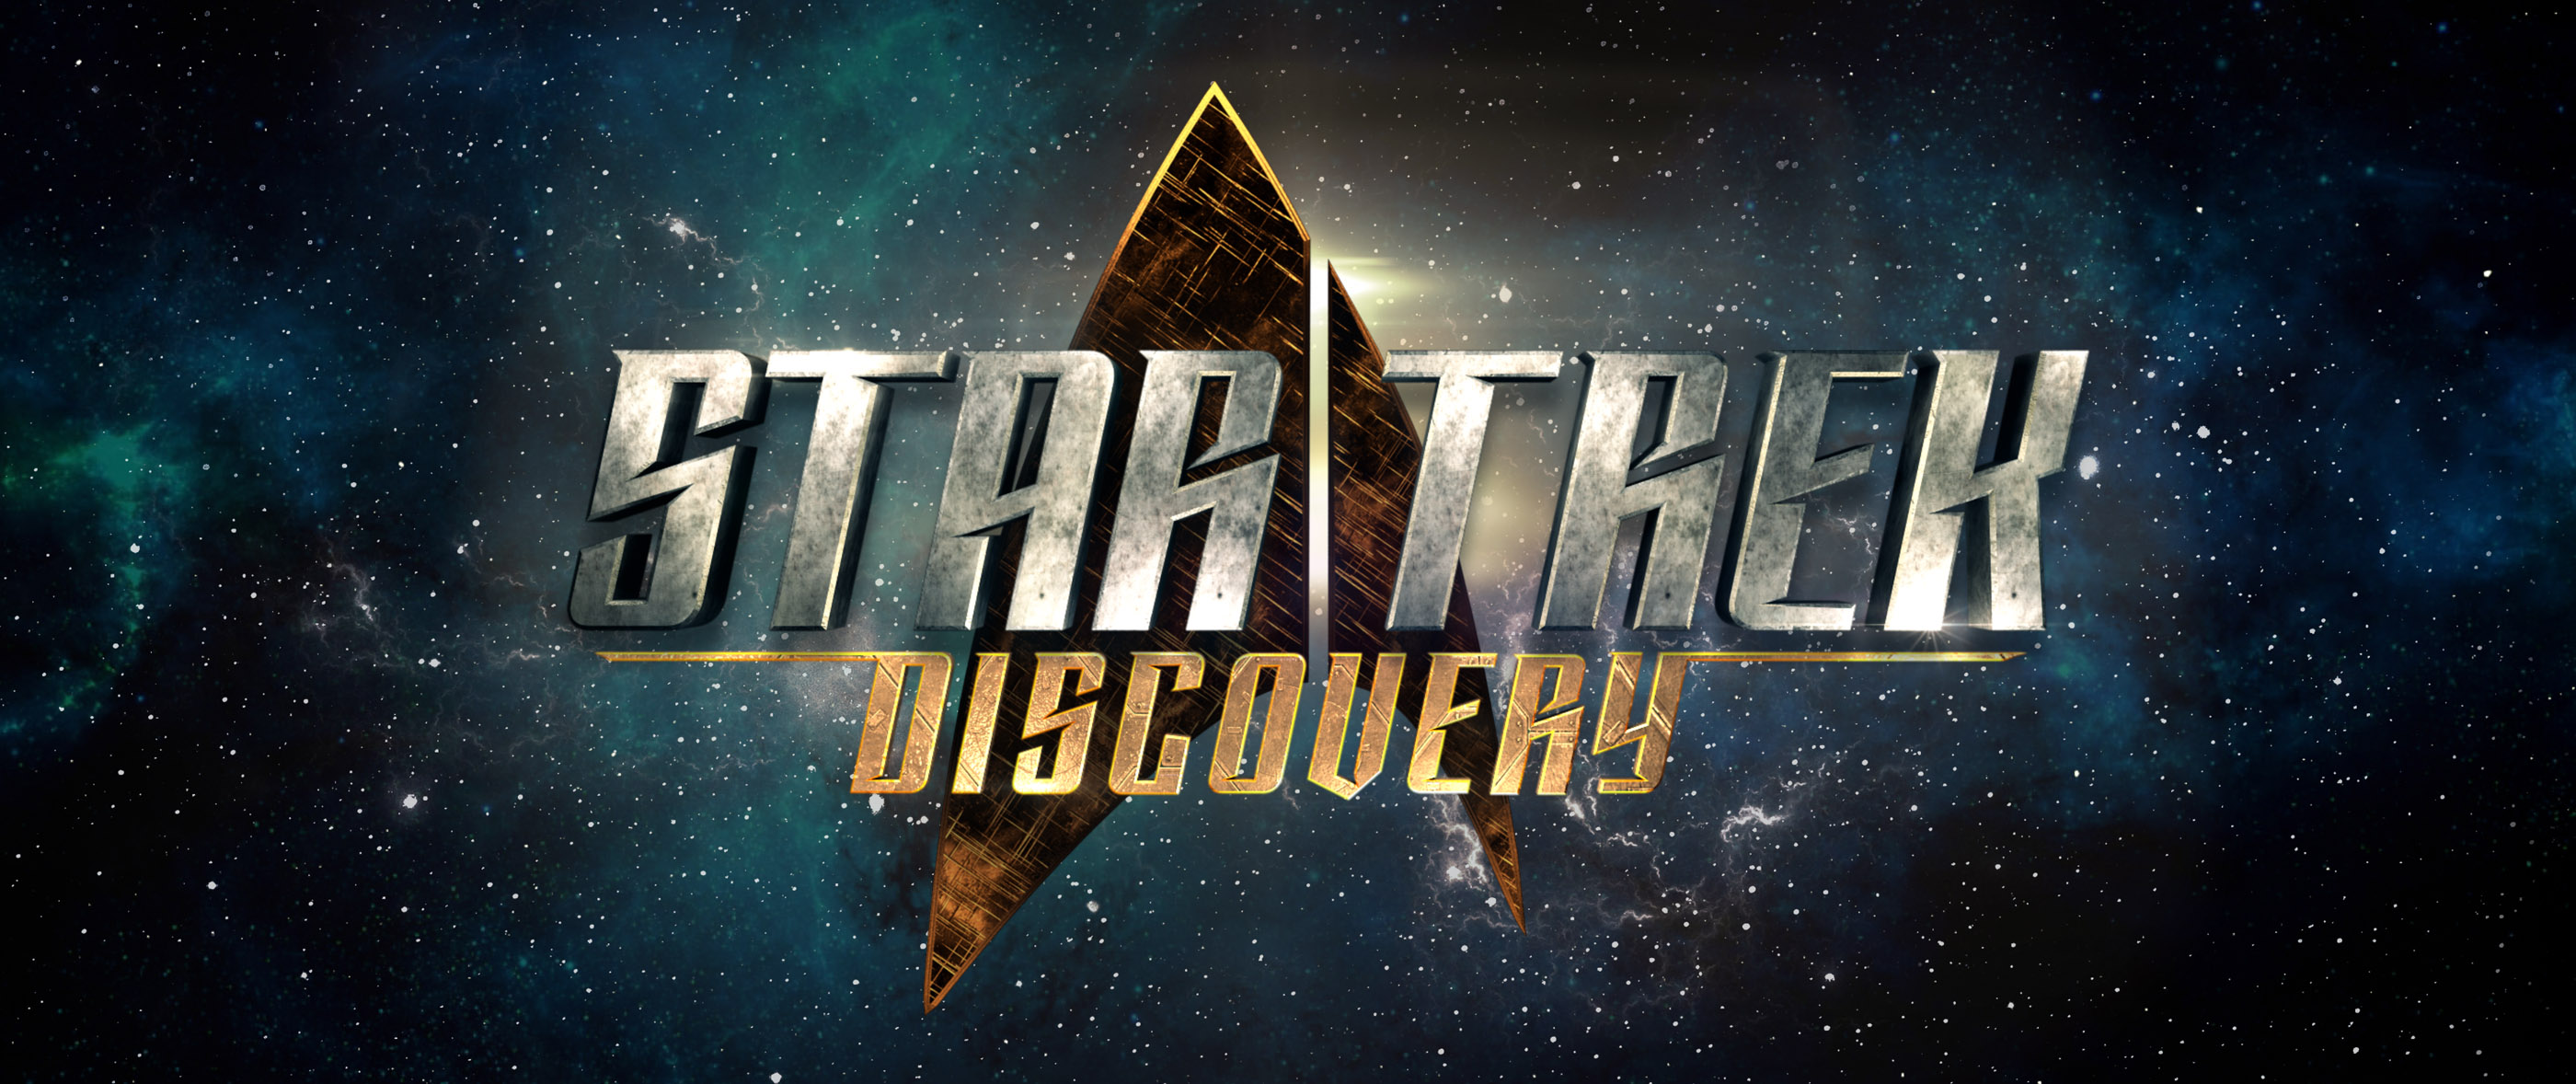 HD desktop wallpaper featuring the Star Trek: Discovery logo set against a starry space background.